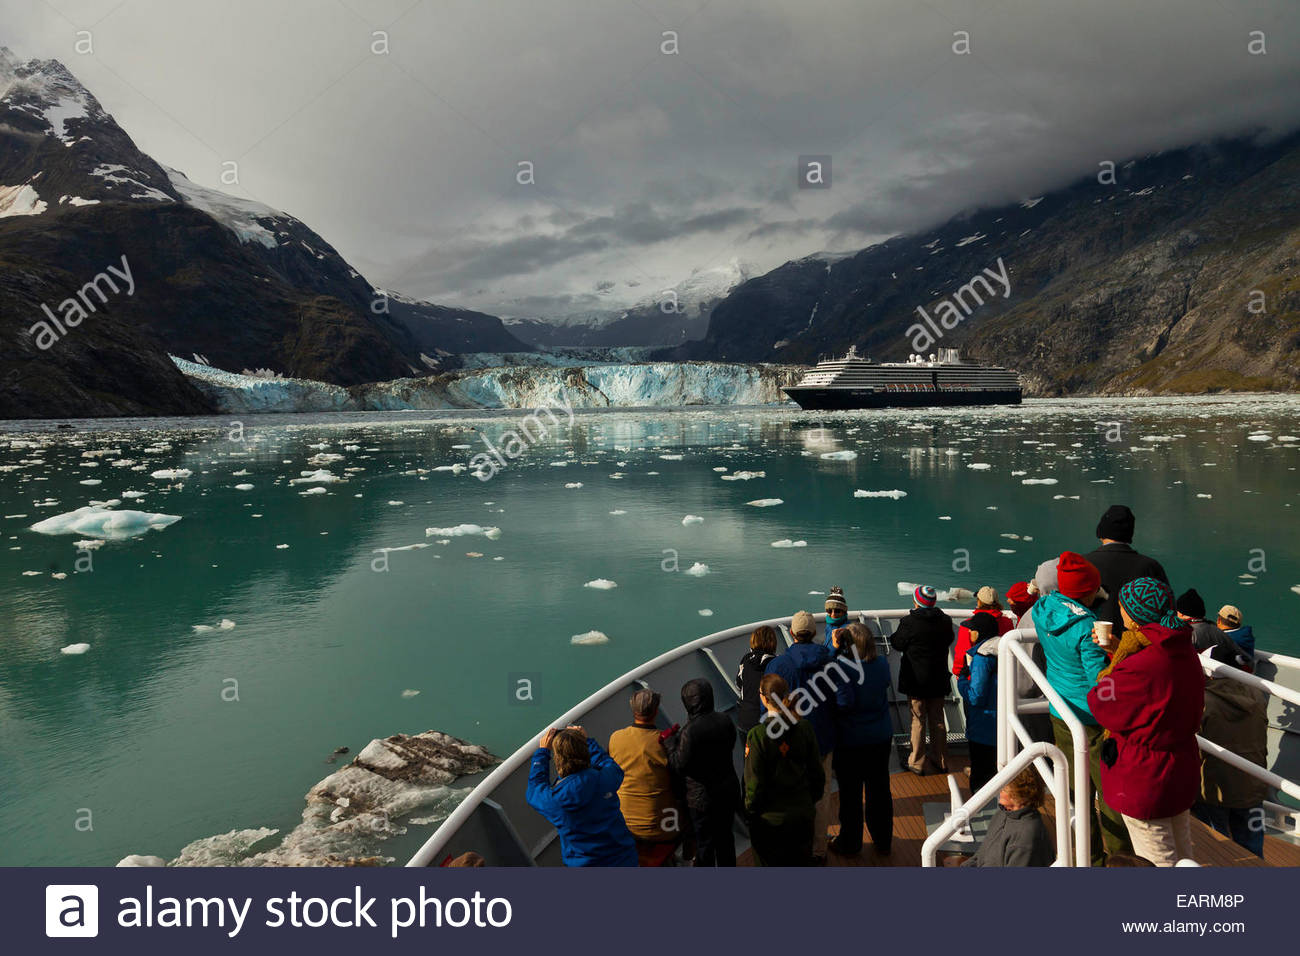 Tourists watch a glacier from a boat. Stock Photo